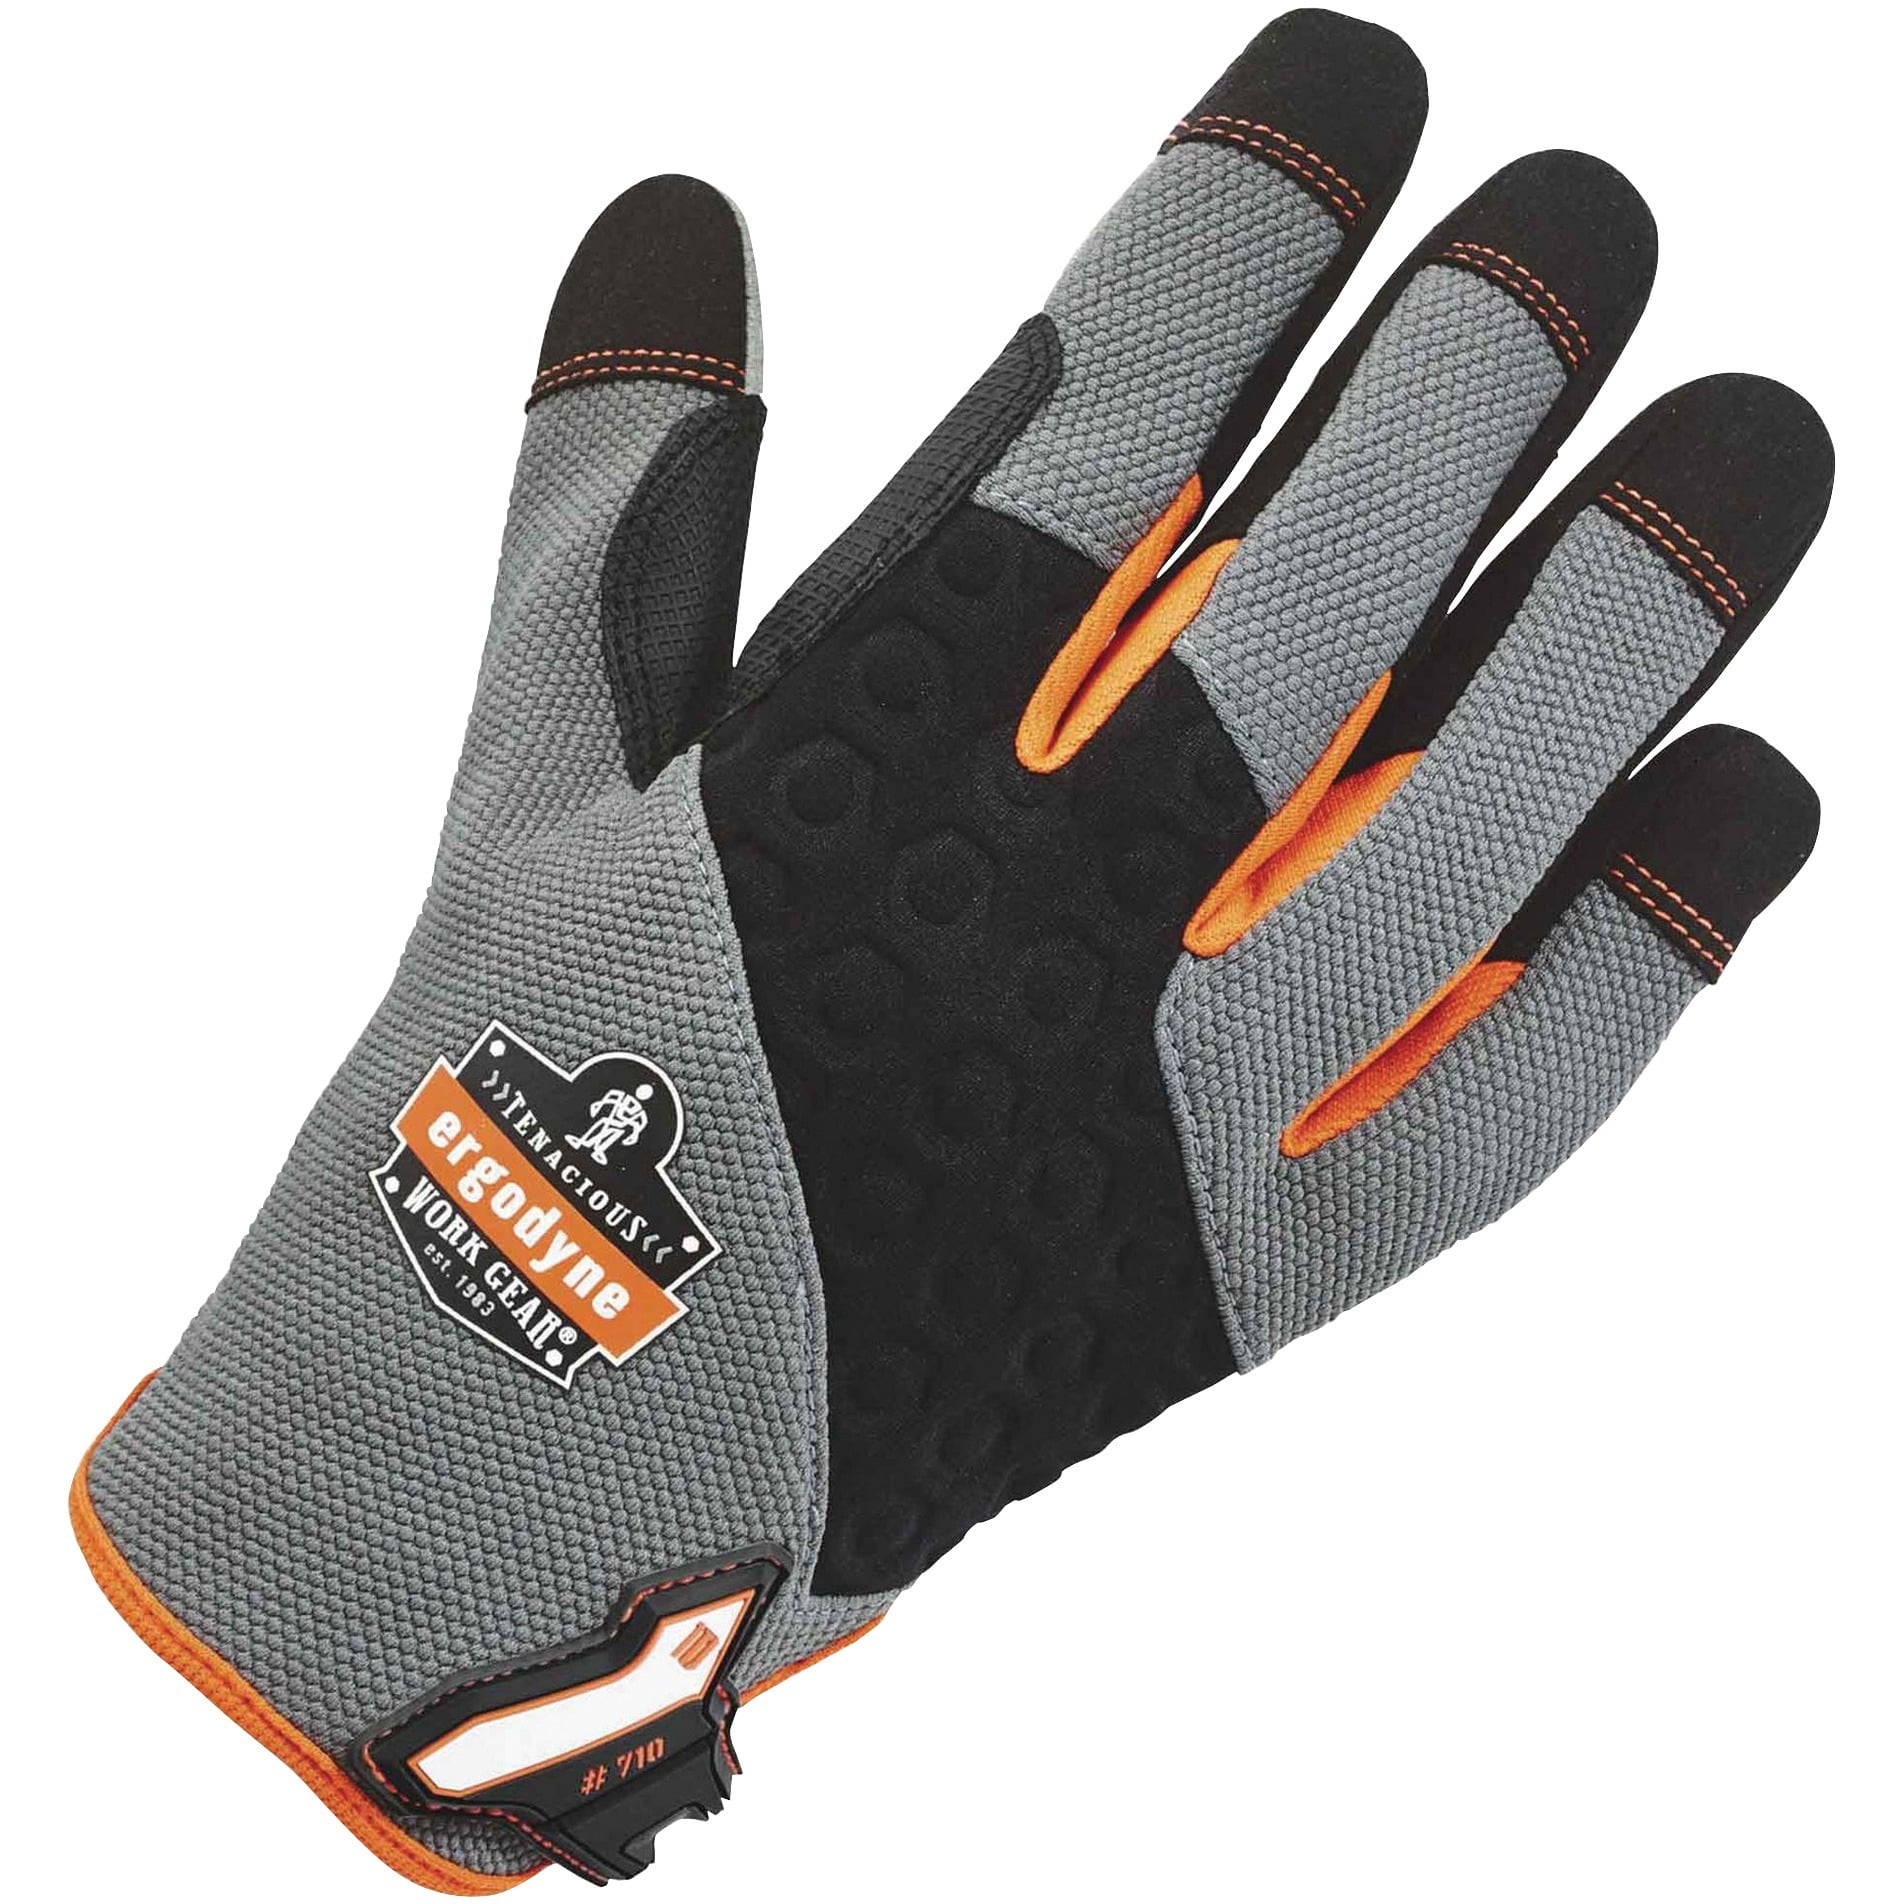 AIGEVTURE Heavy Duty Synthetic Leather Impact Work Gloves Men, Mechanic Gloves, Sensitive Touch Screen Flexible Grip Gloves for Work